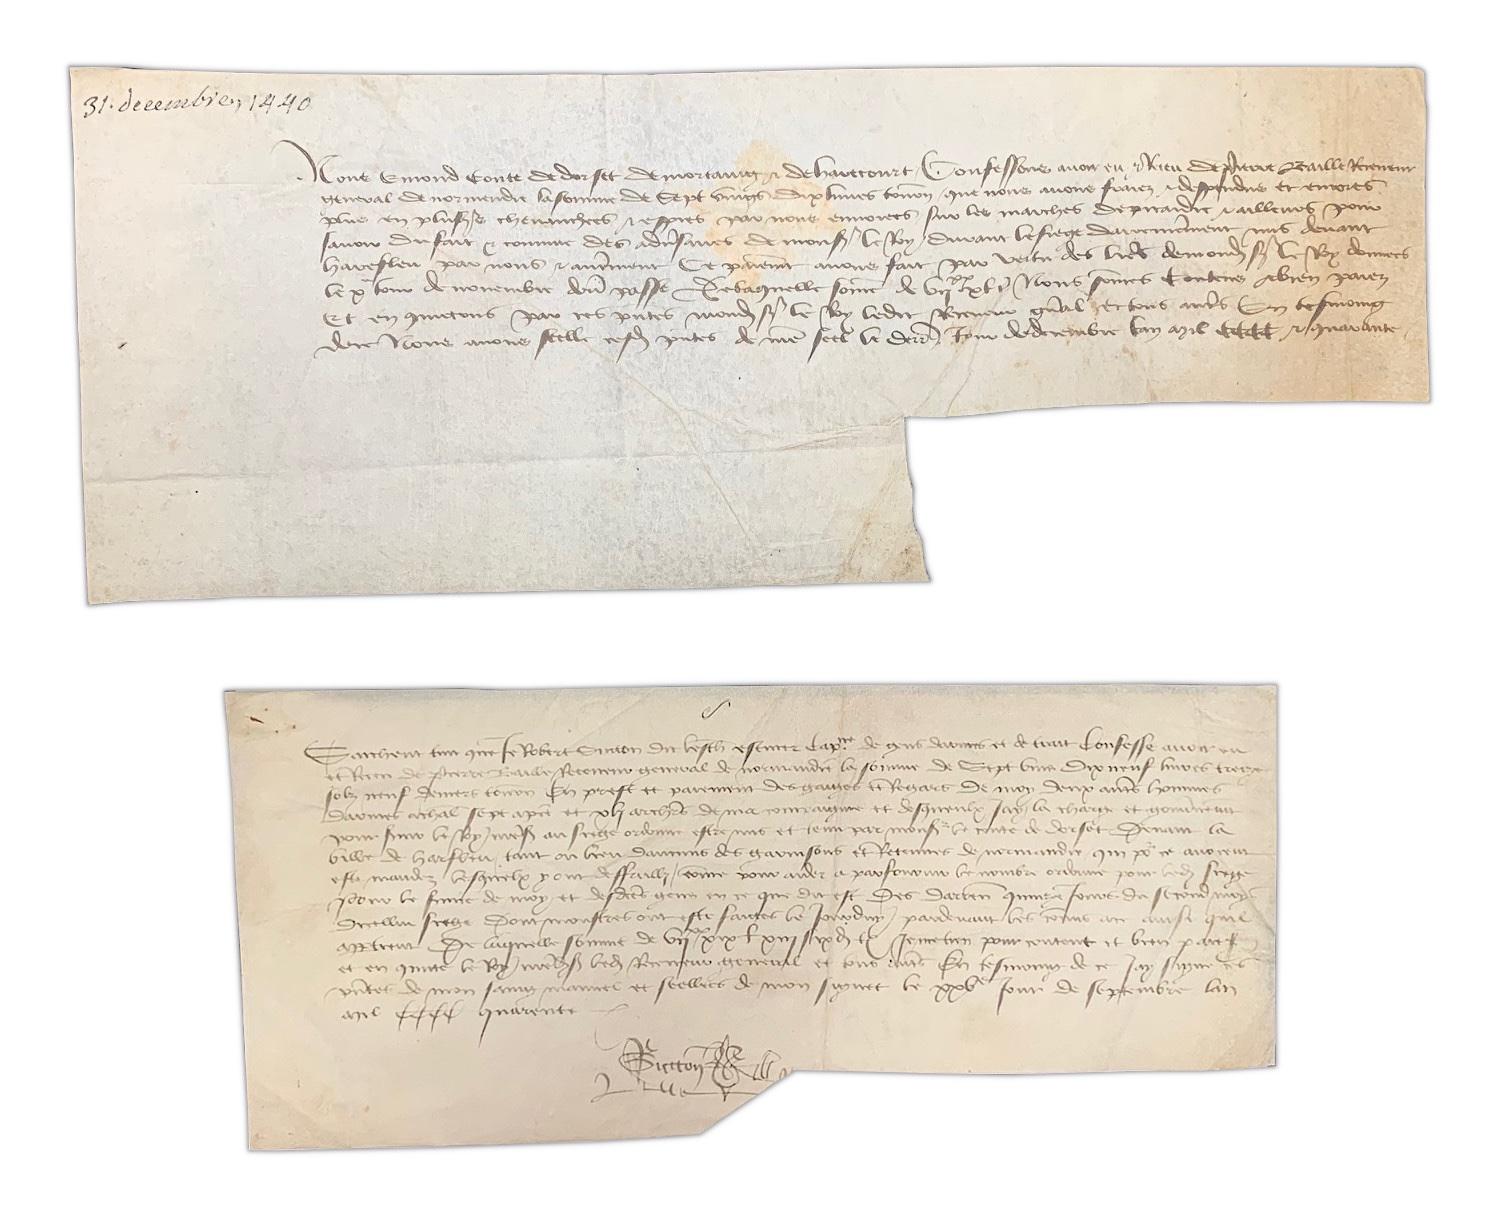 Paper 100 Years War Letters Sent by Royal Messenger